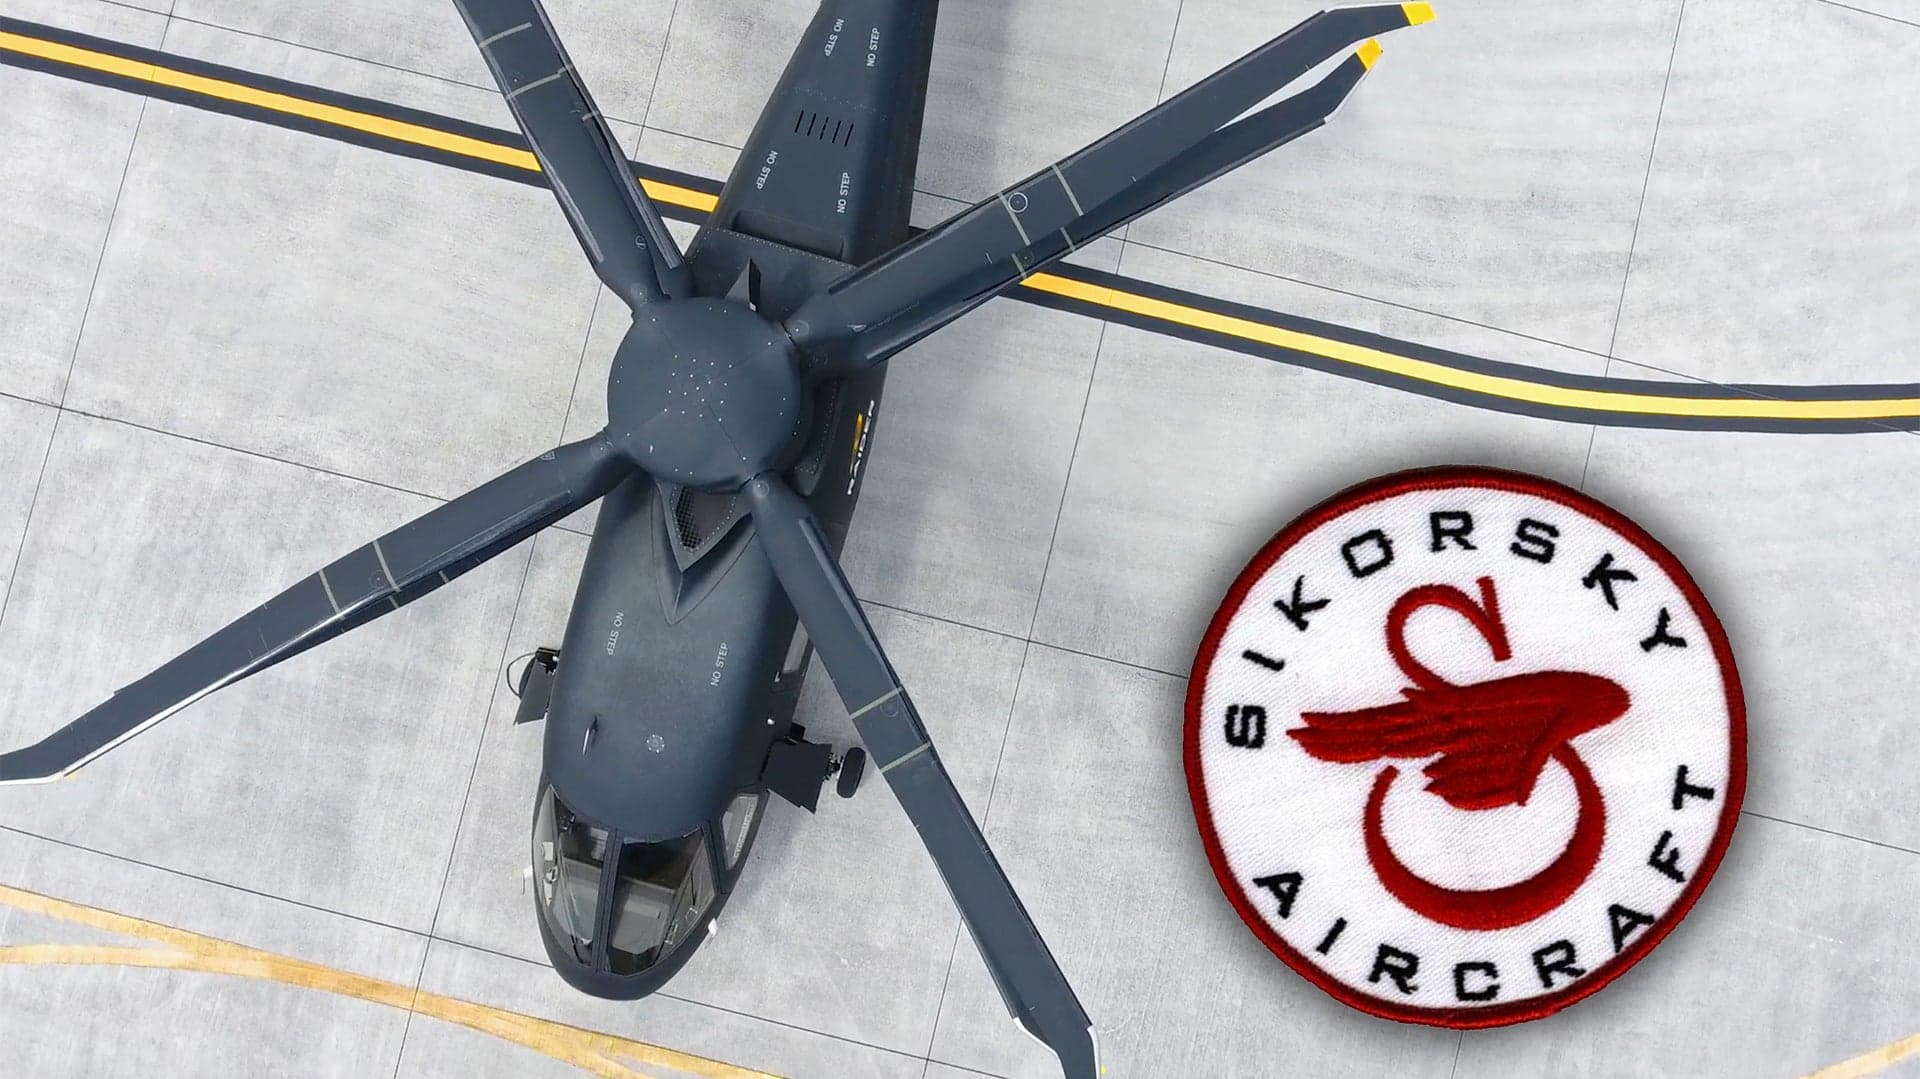 We Talk Everything S-97 Raider And SB>1 Defiant With Sikorsky’s Top Program Officials